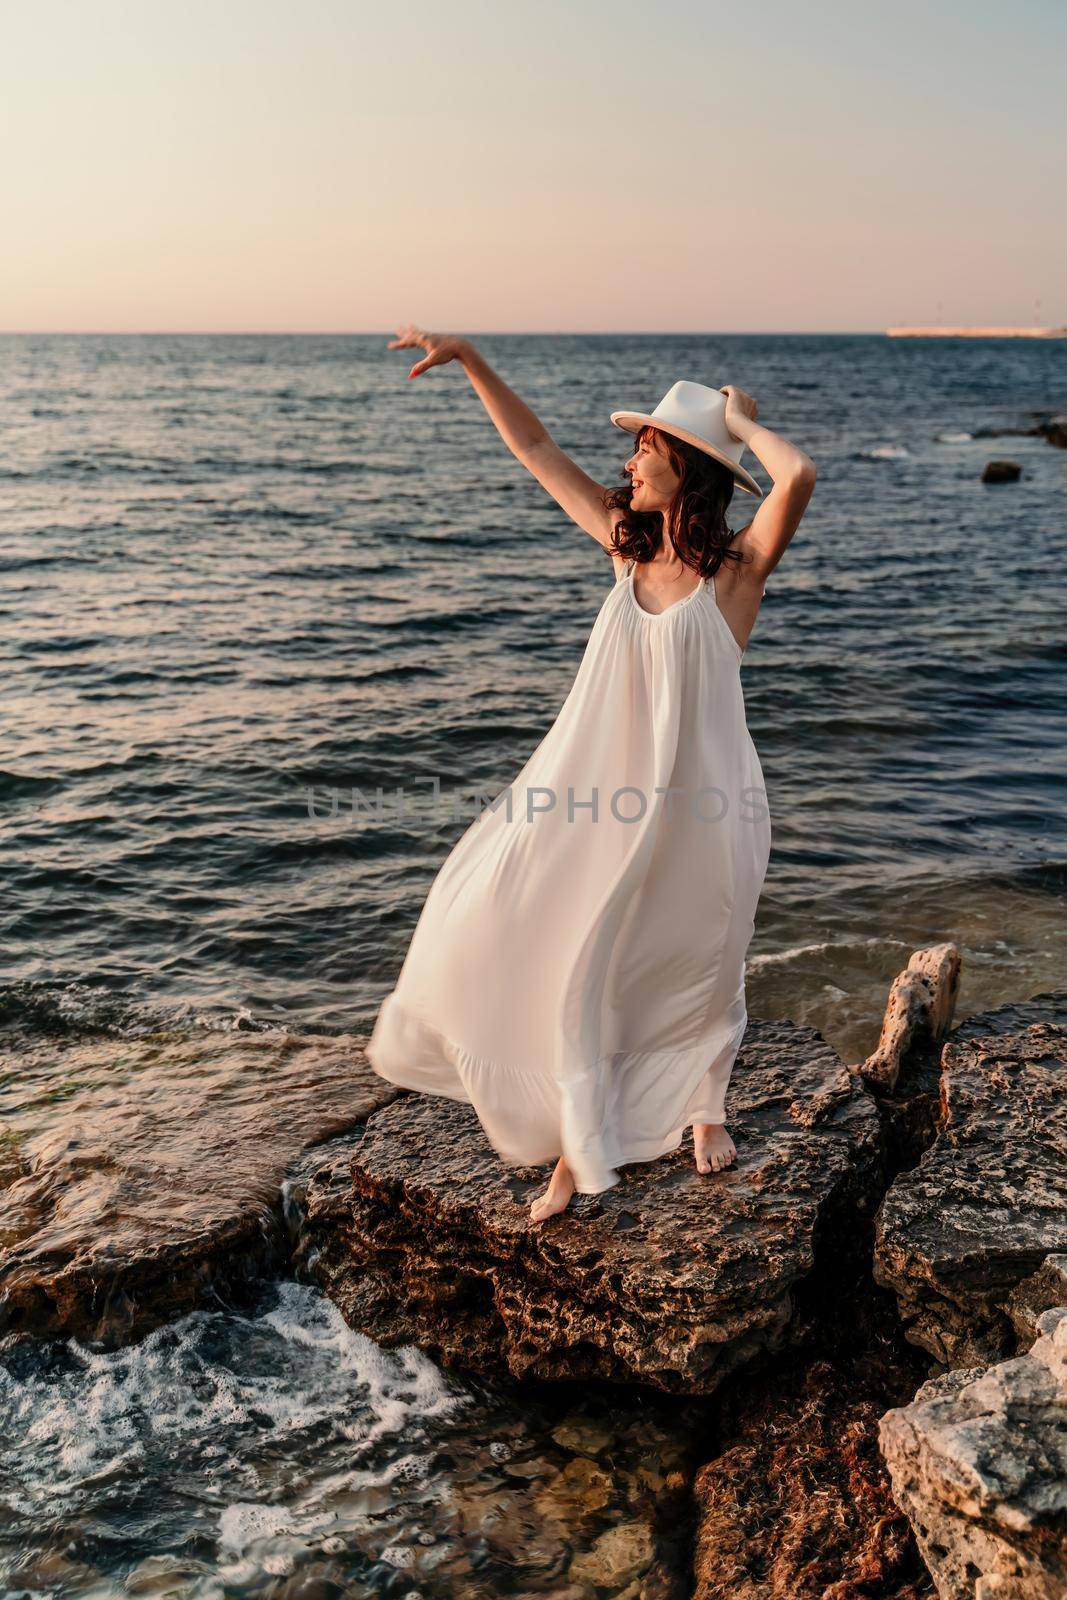 A woman in a white dress and hat is standing on the beach enjoying the sea. Happy summer holidays by Matiunina